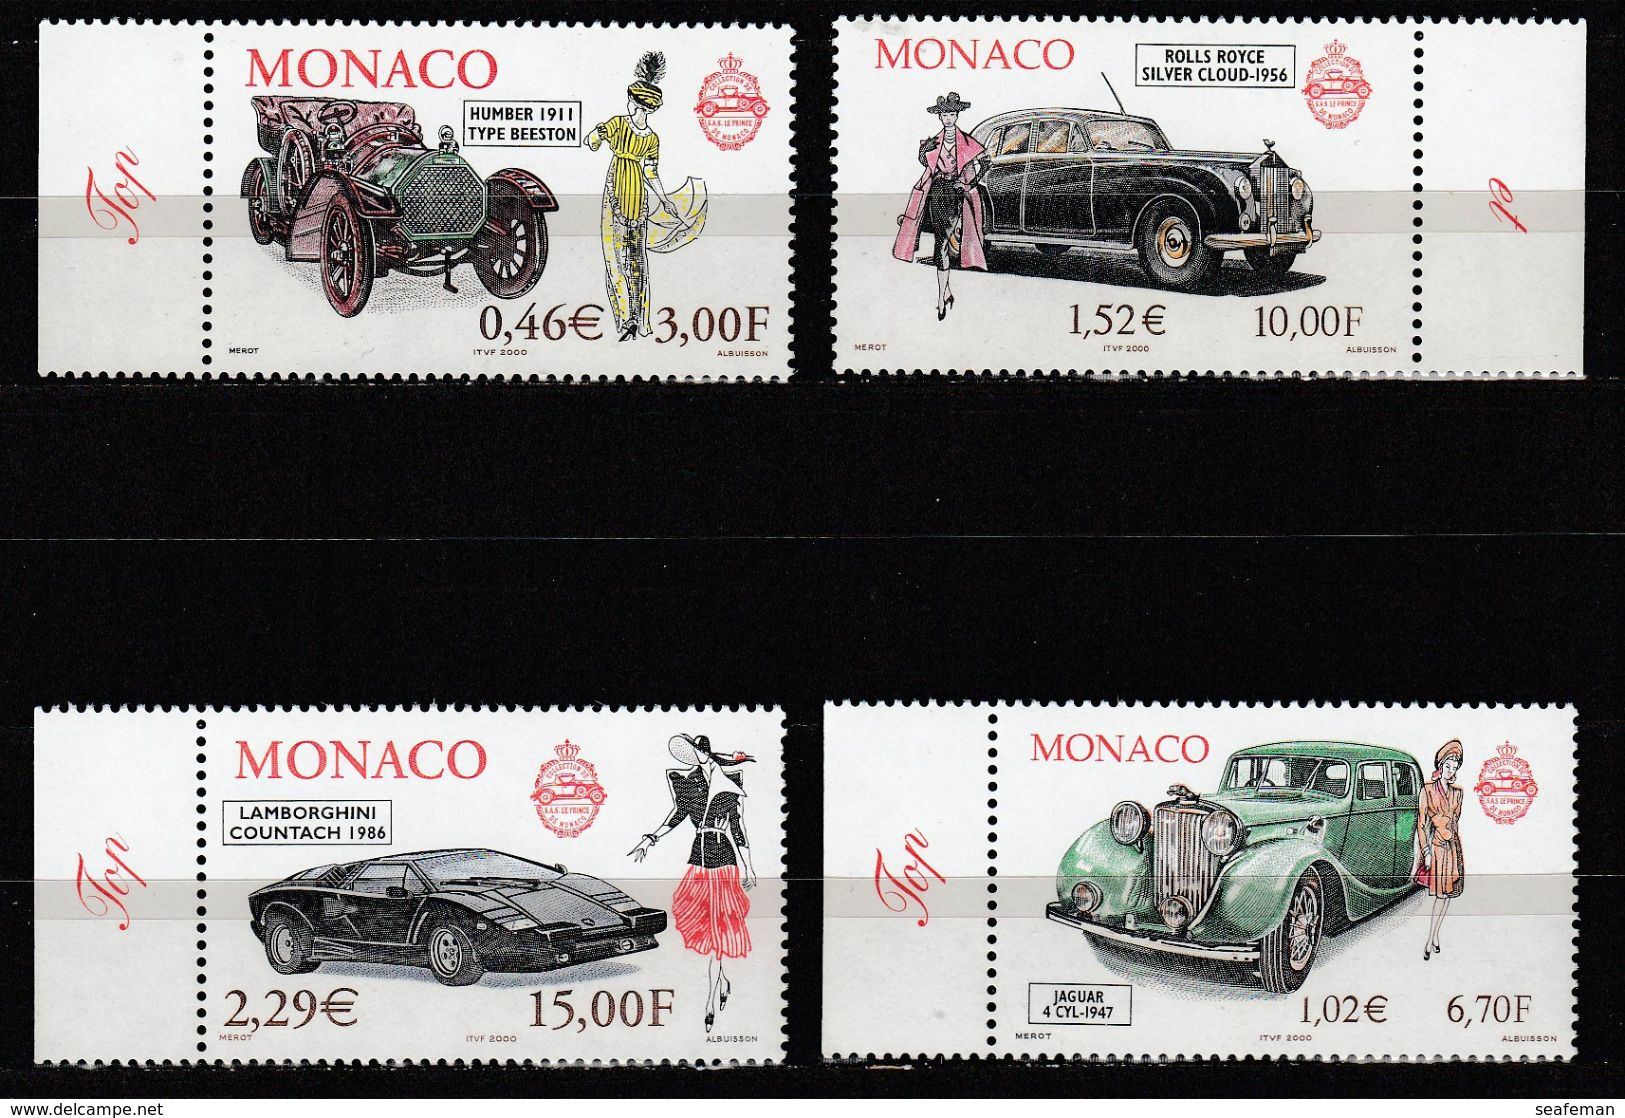 MONACO COLLECTION,many POSTFRISCH,mostly good quality,high cw,used/MNH/MH,see 81 scans [85]